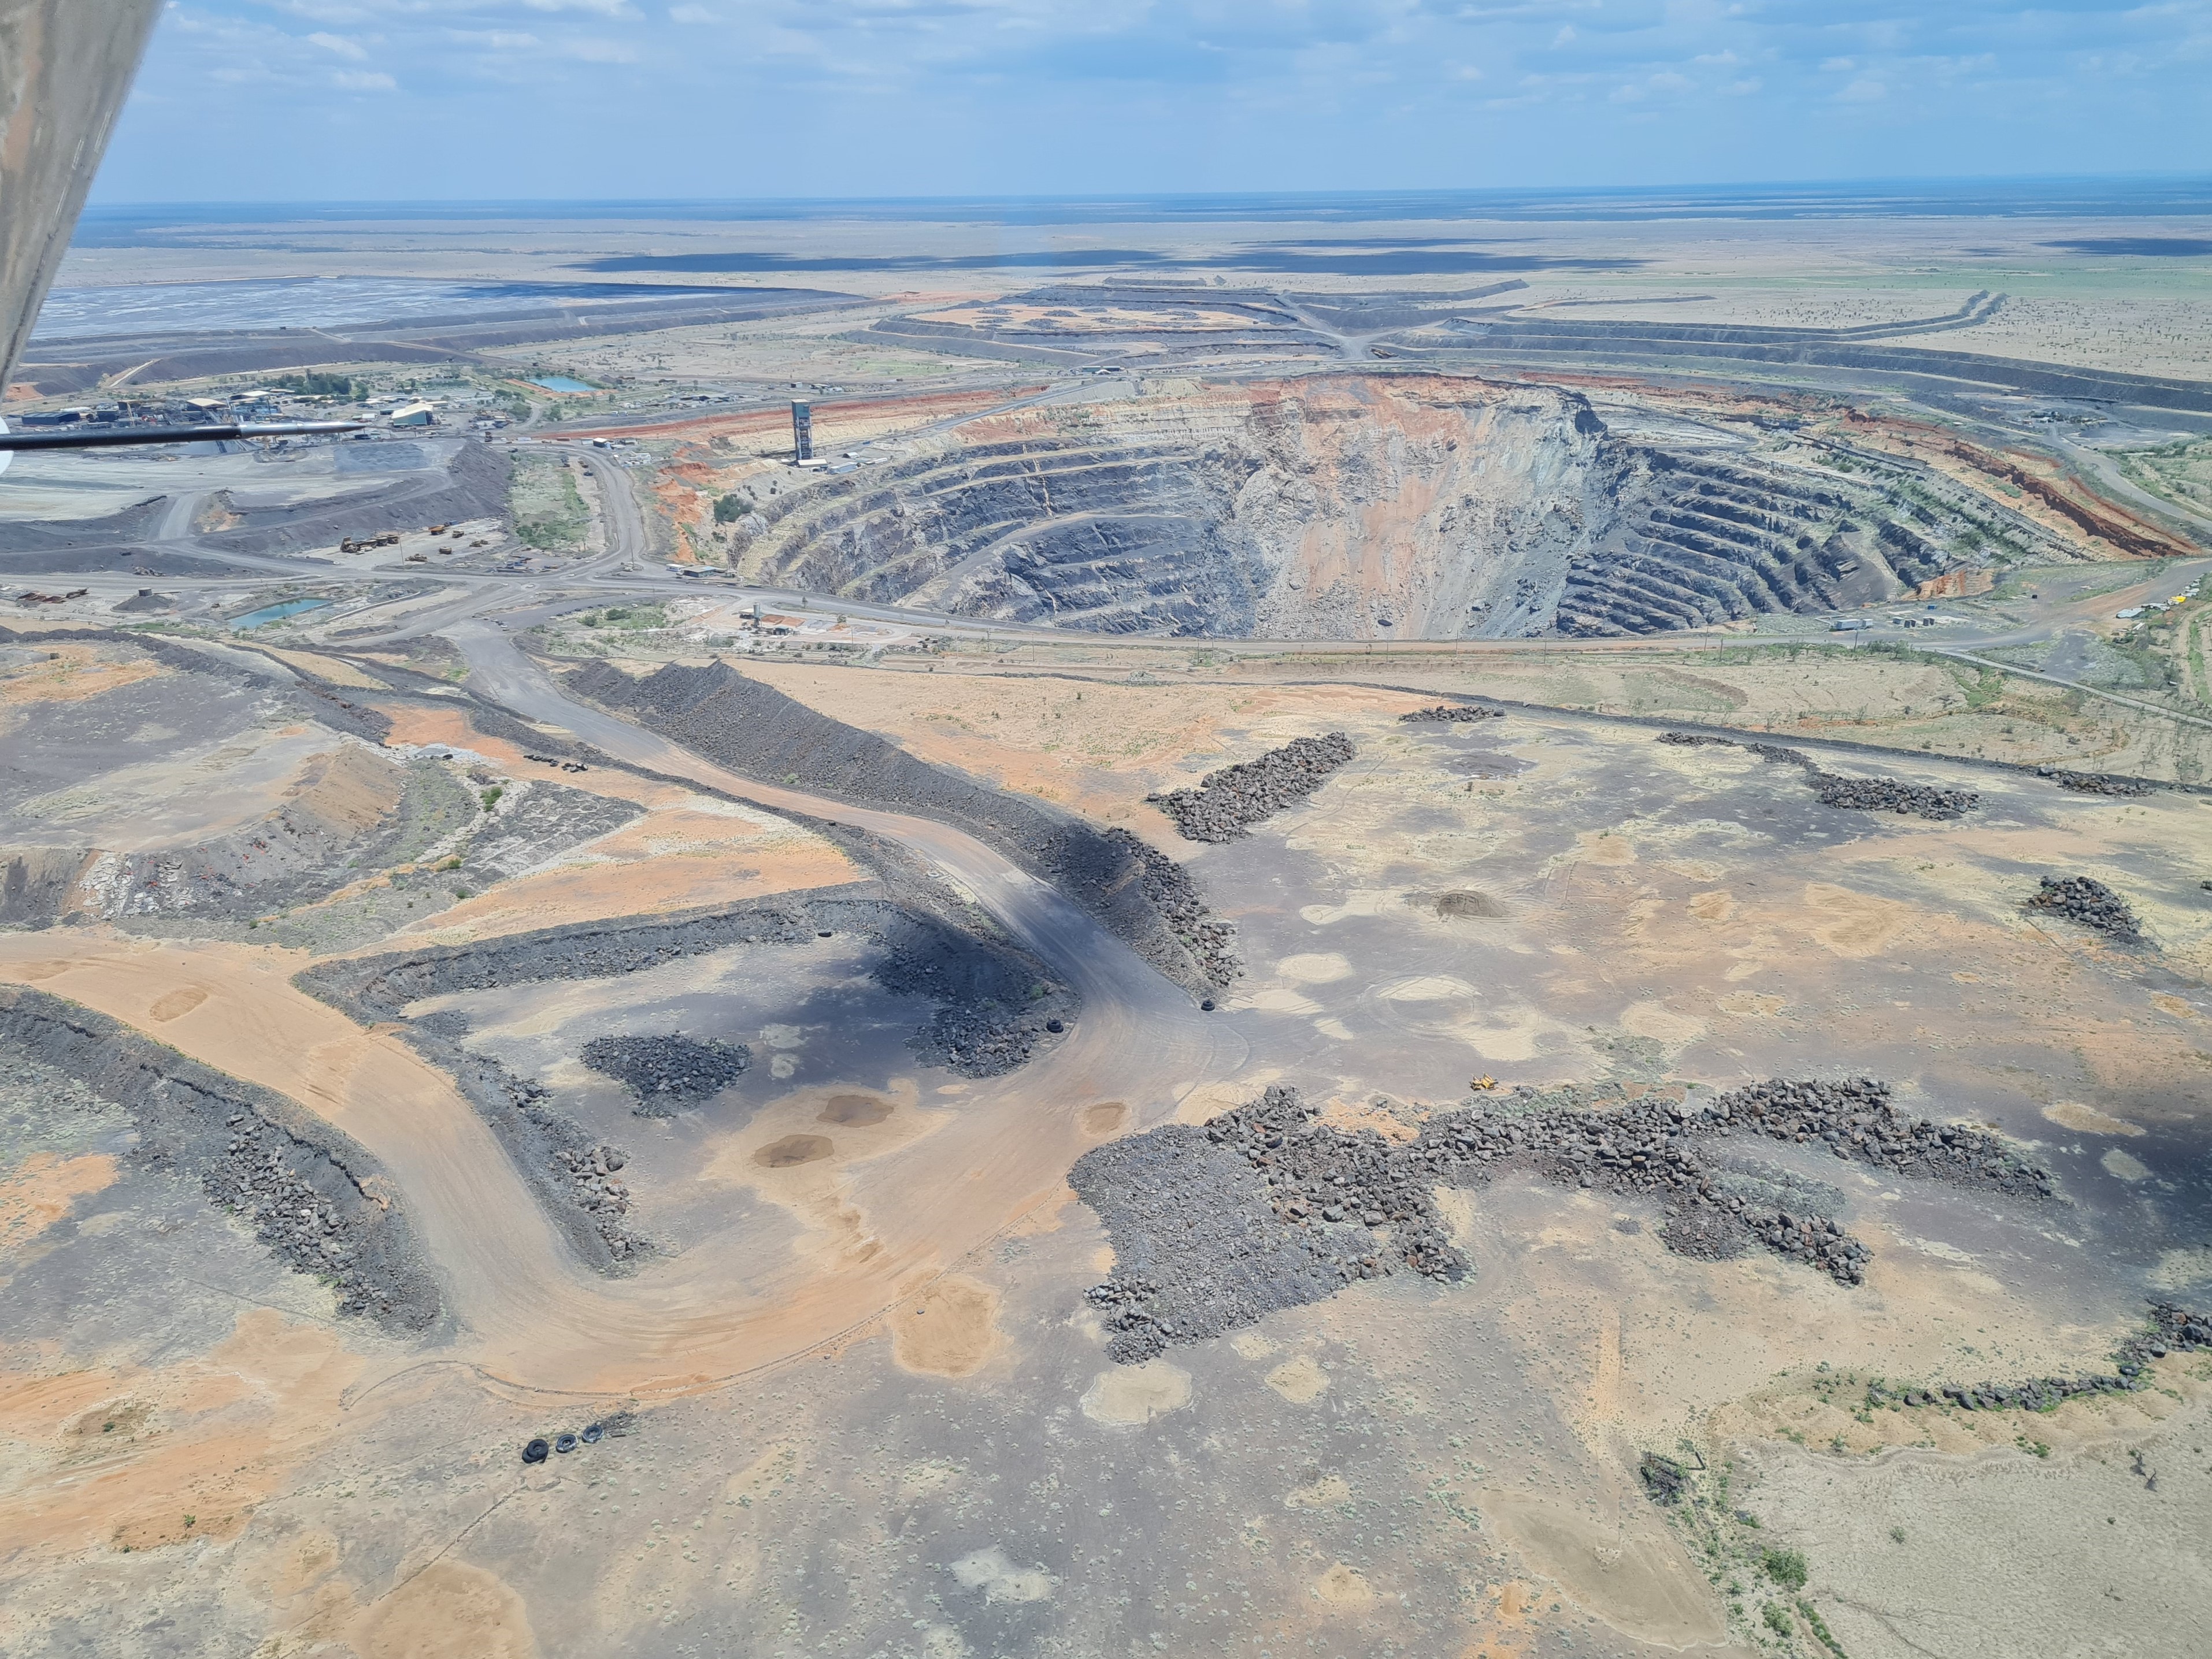 We flew past the large Ernest Henry Copper Mine.